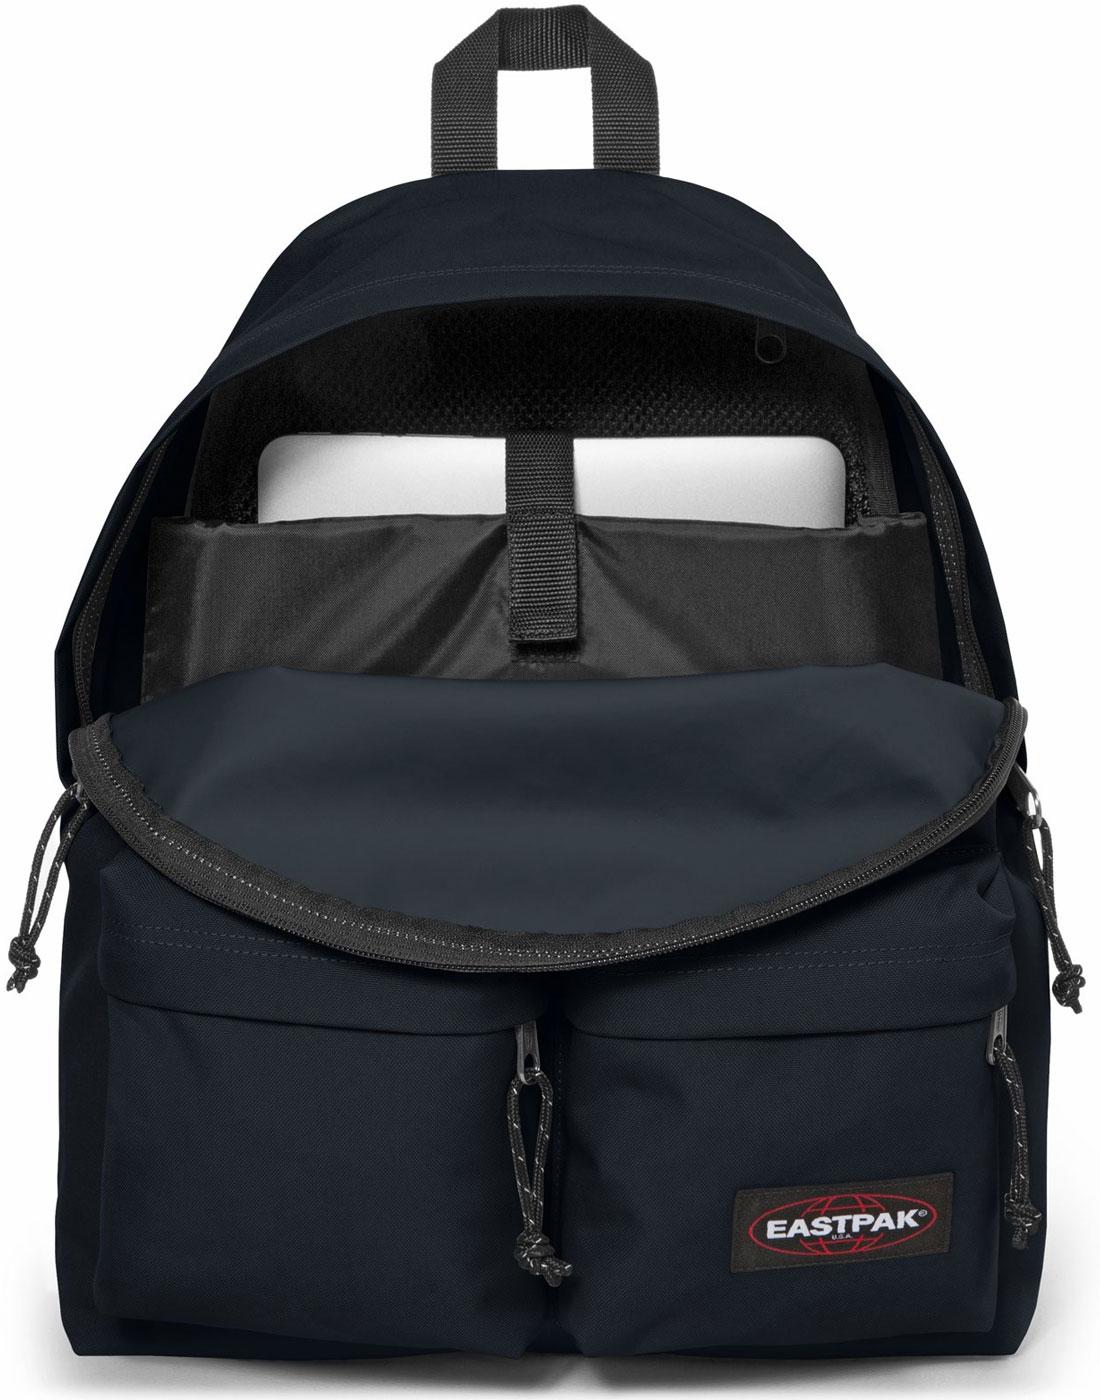 EASTPAK Padded Doubl'r Retro 1970s Backpack in Cloud Navy